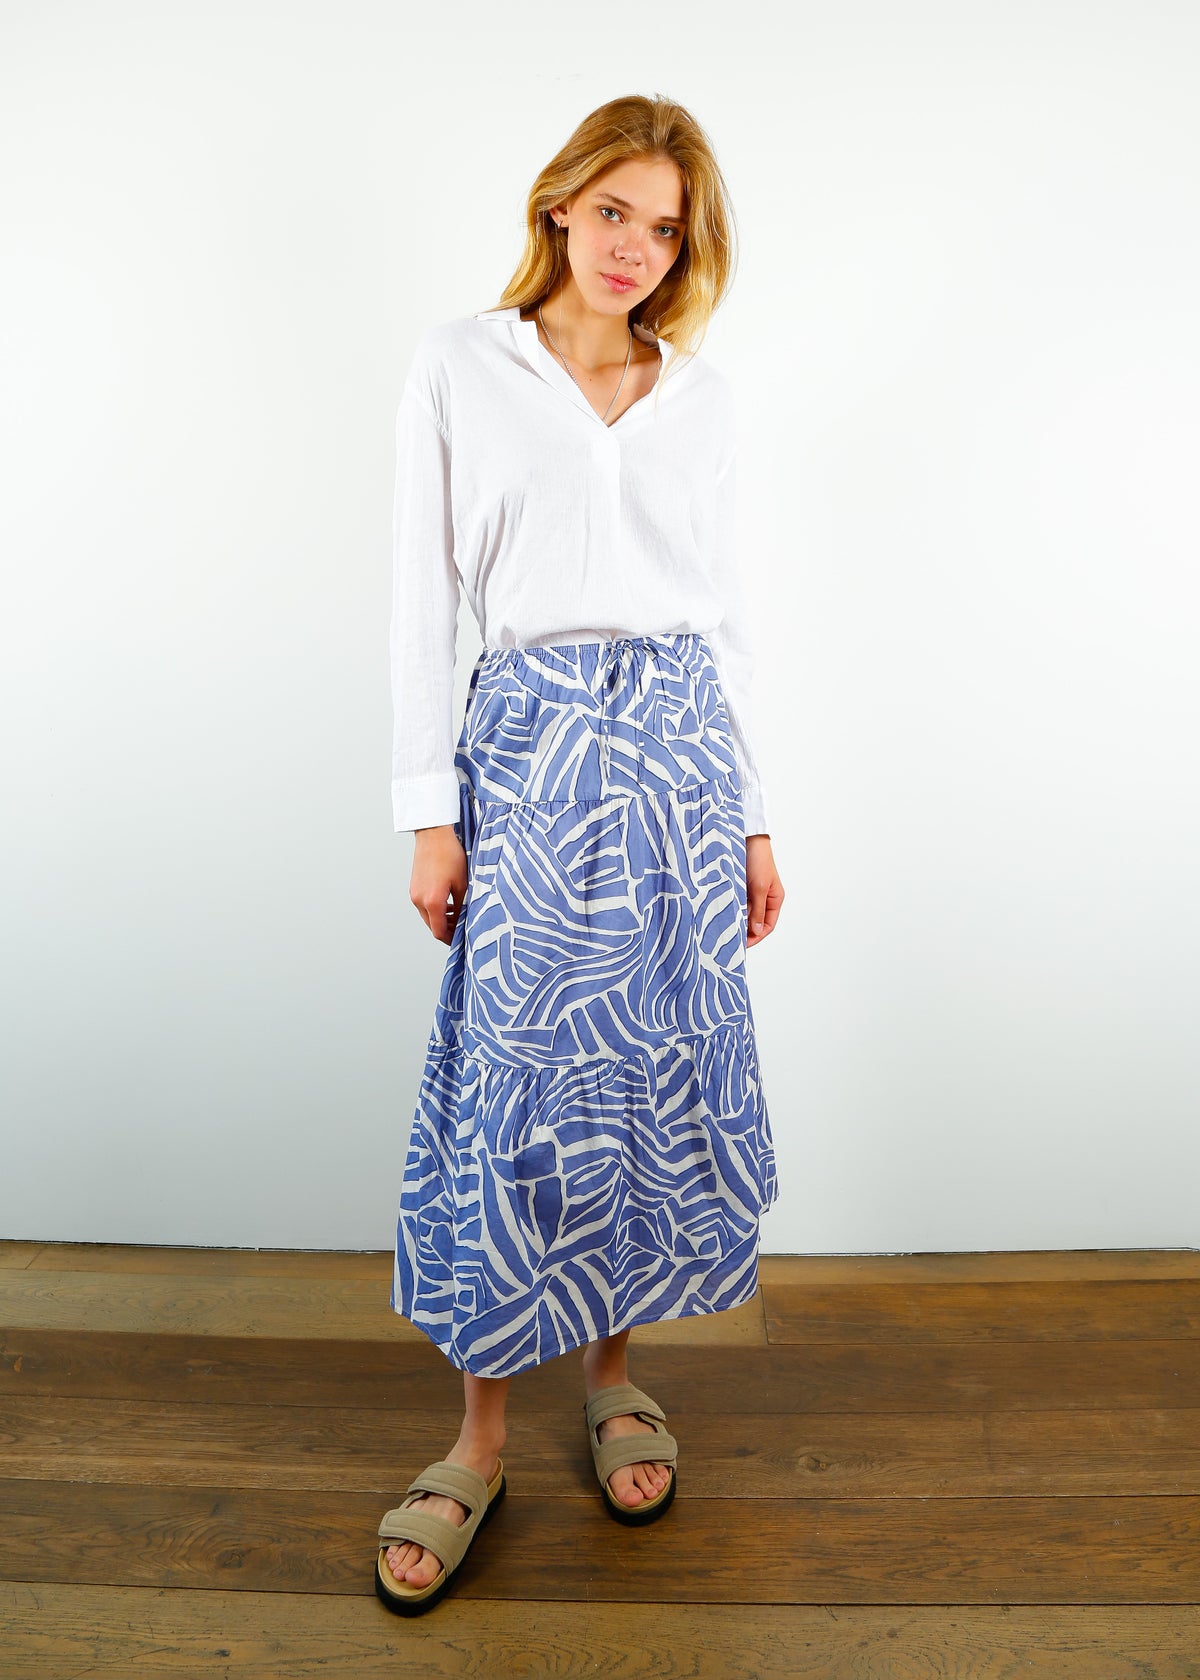 RAILS Mary Skirt in Island Waves